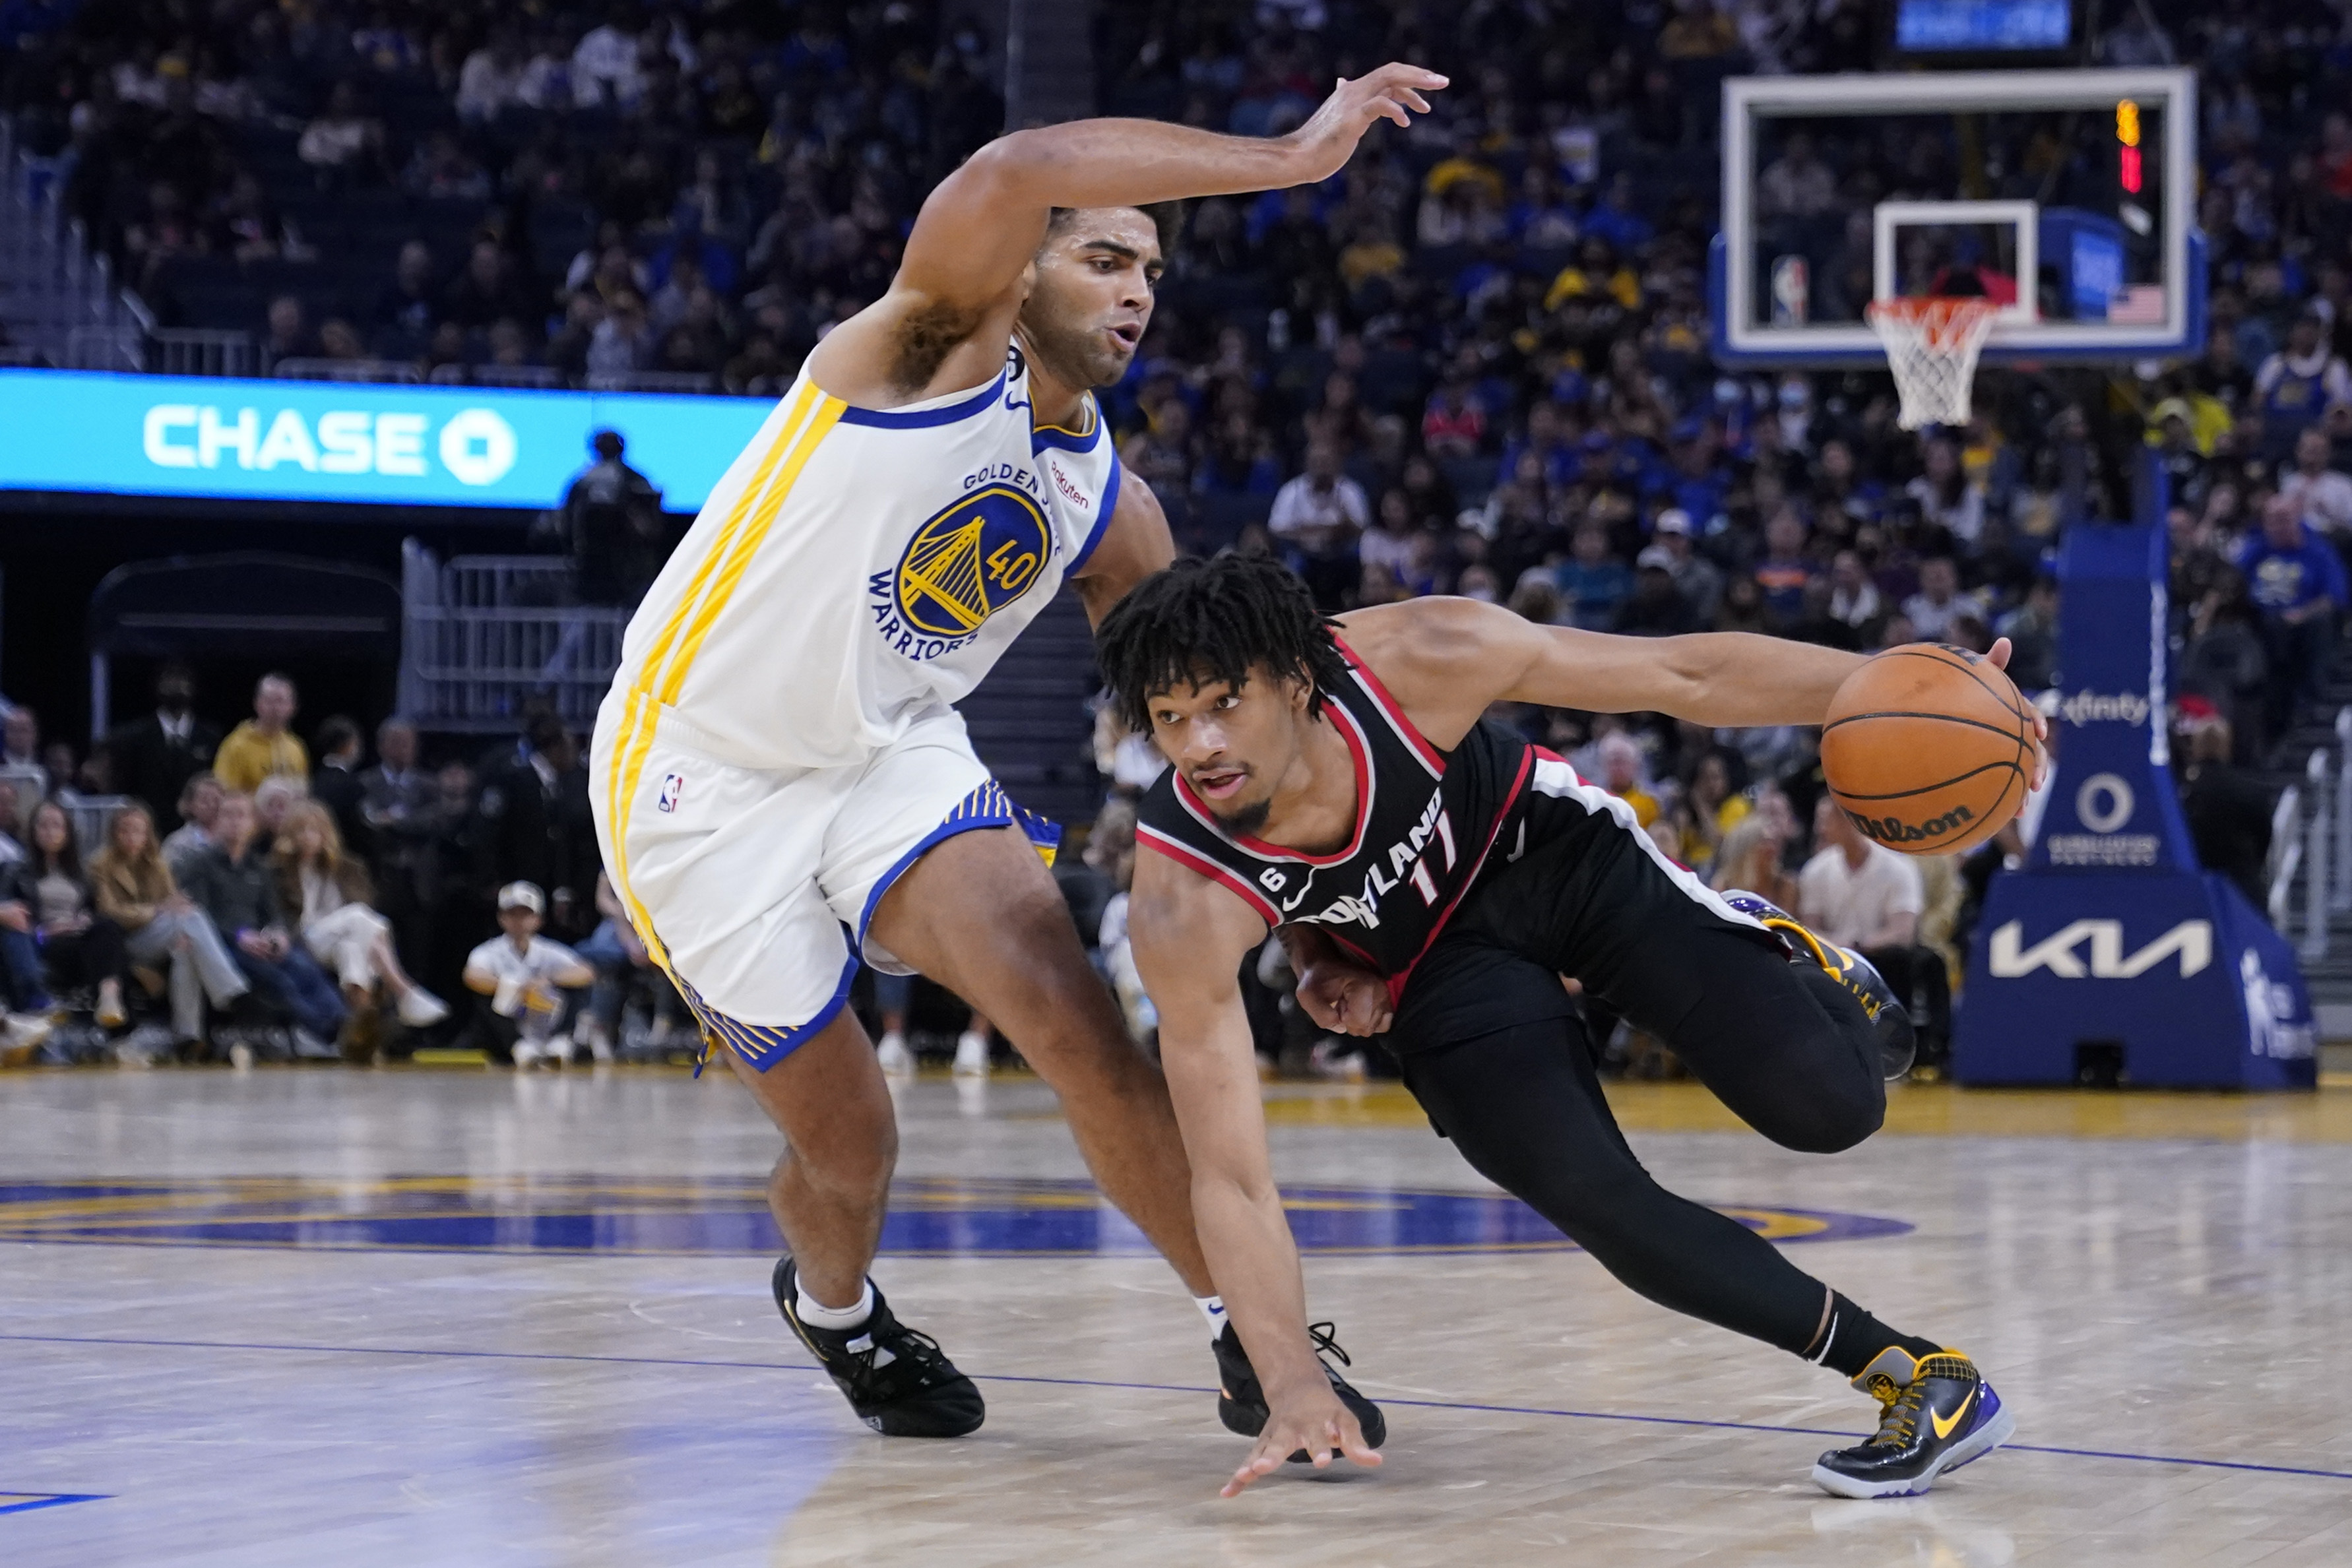 Dan Cooper on Instagram: Shaedon Sharpe sneaker rotation The Portland  Trailblazers' season is mercifully over, after losing to the Golden State  Warriors by 56 points yesterday, giving up an NBA-record 55 points